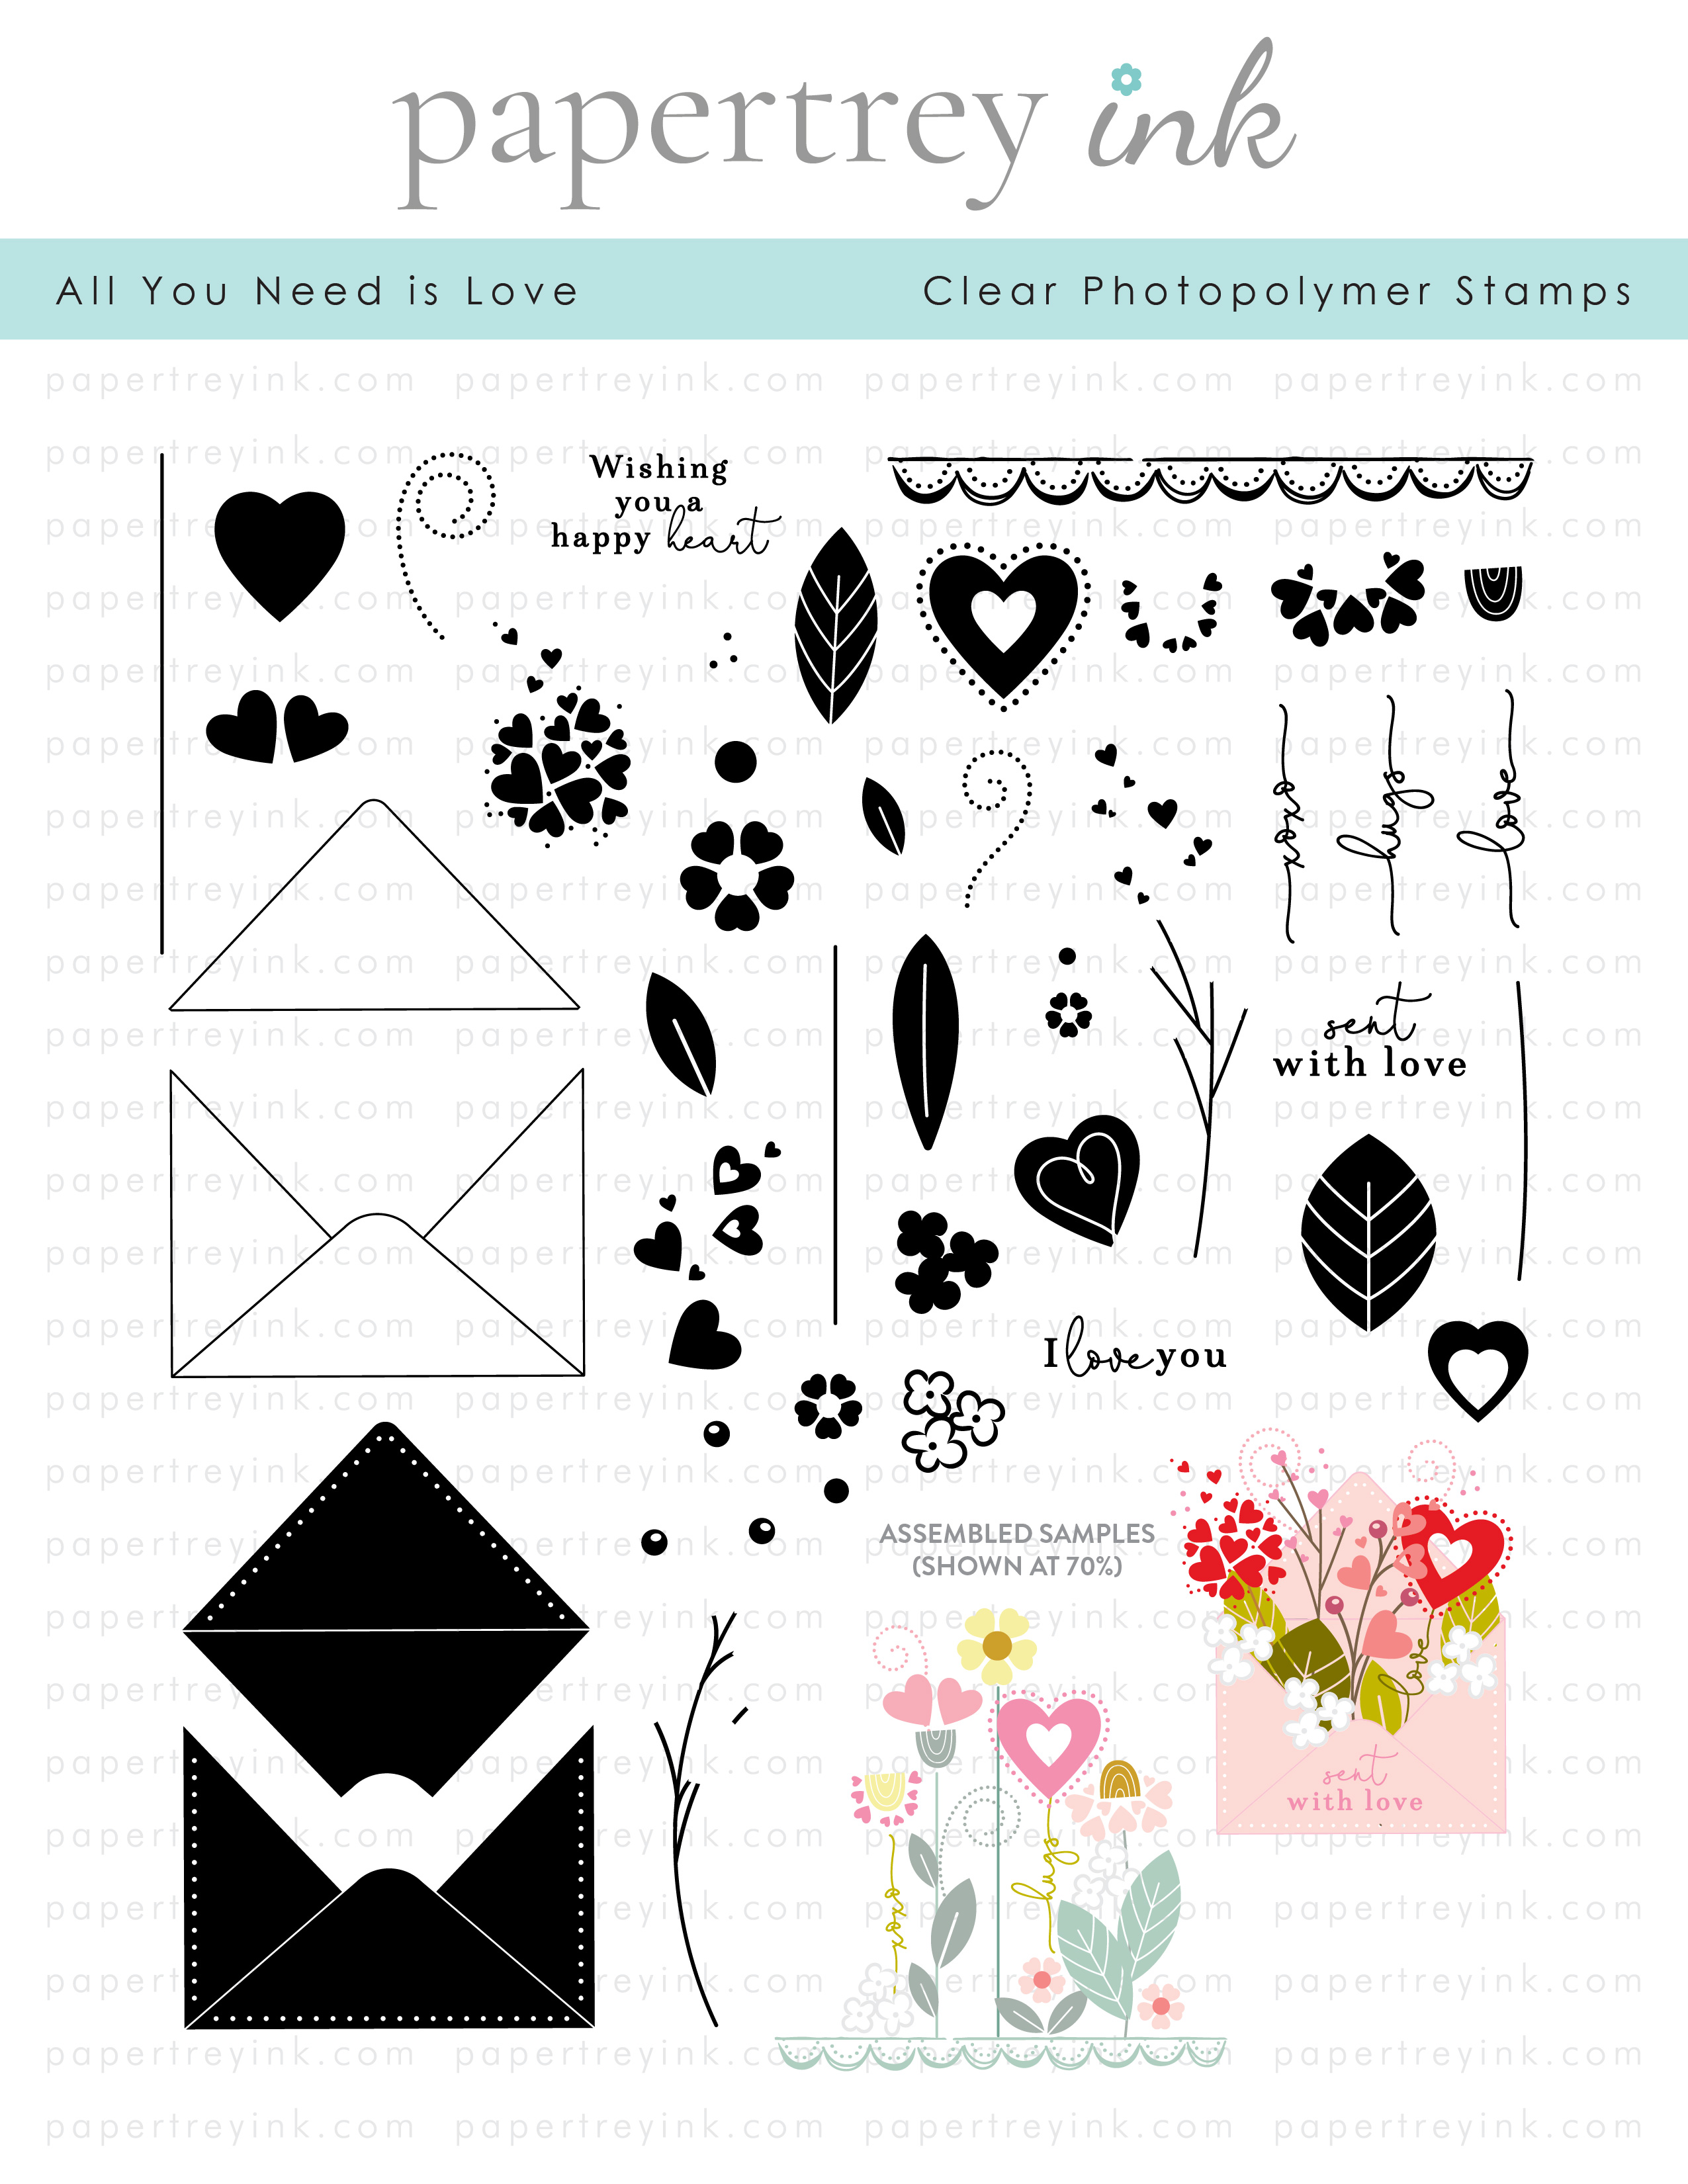 Papertrey Ink - All You Need is Love Stamp Set